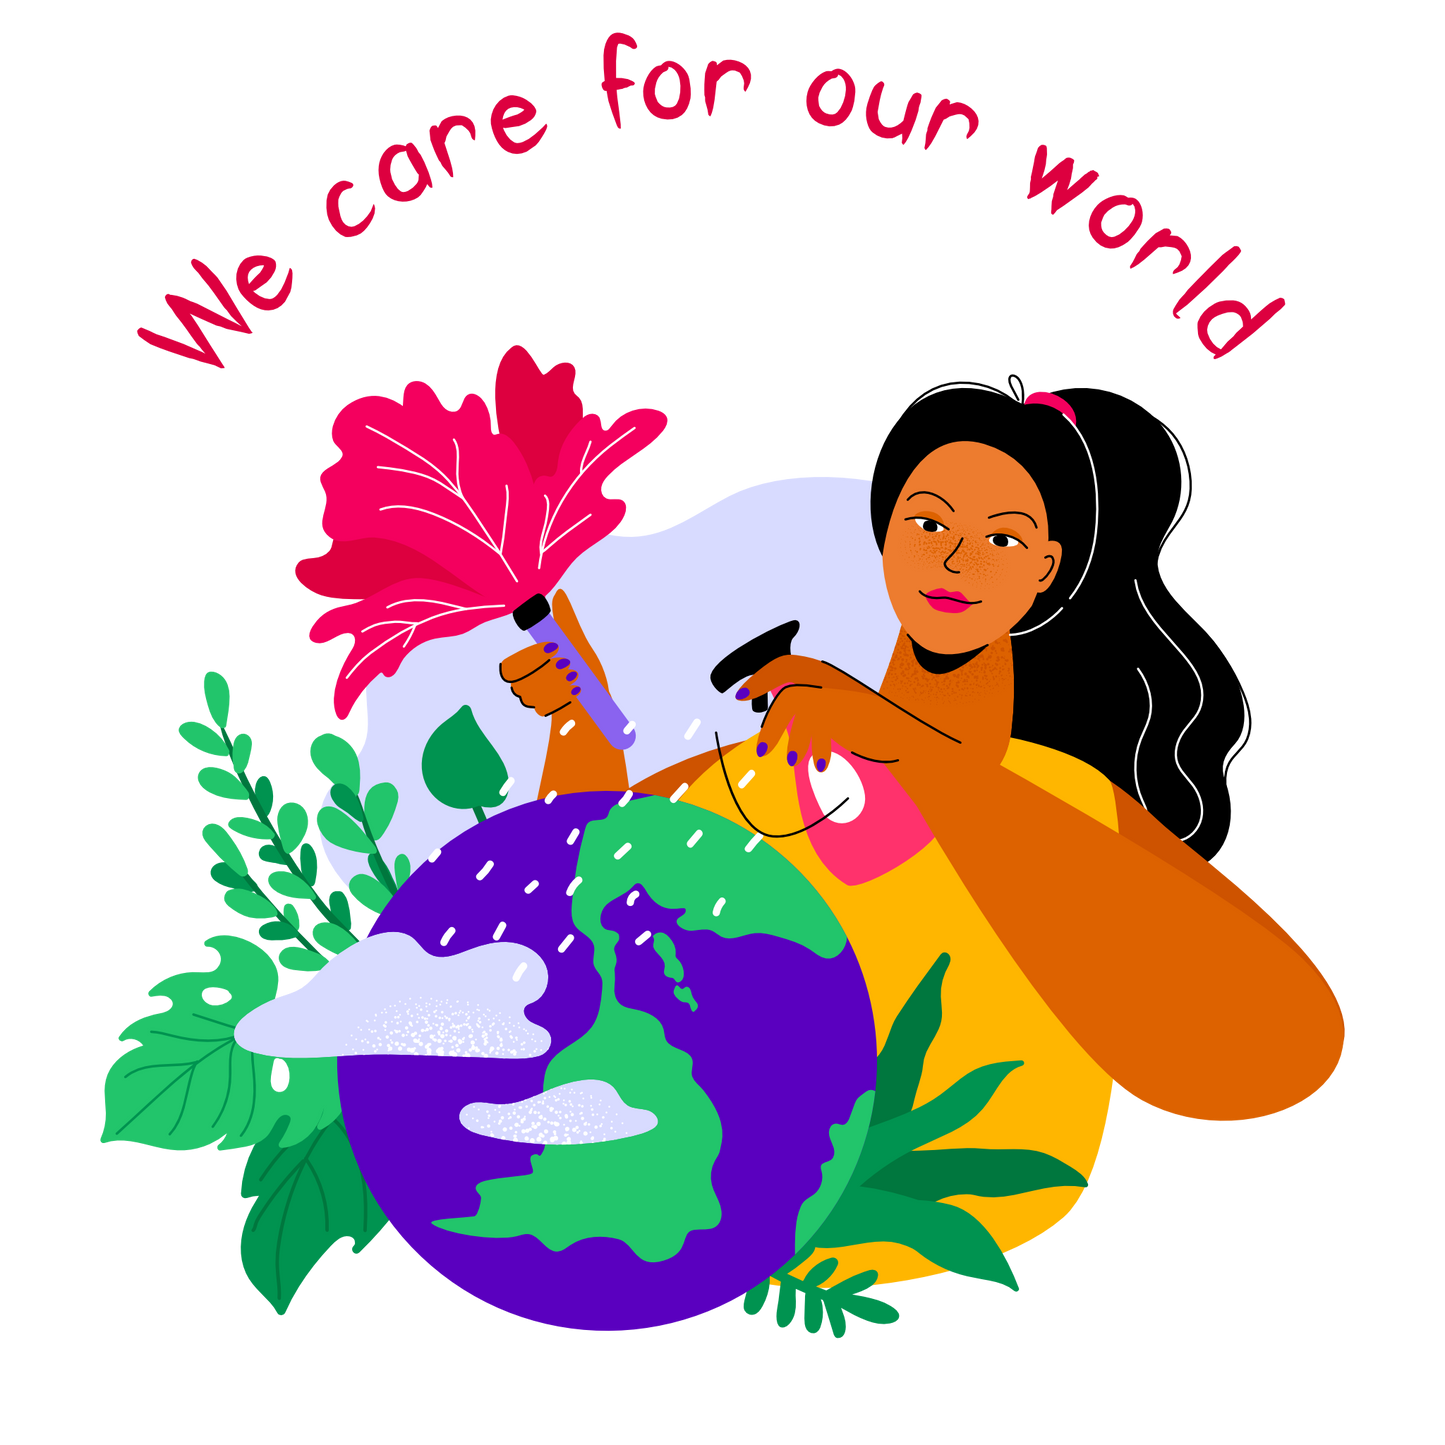 We care for our world